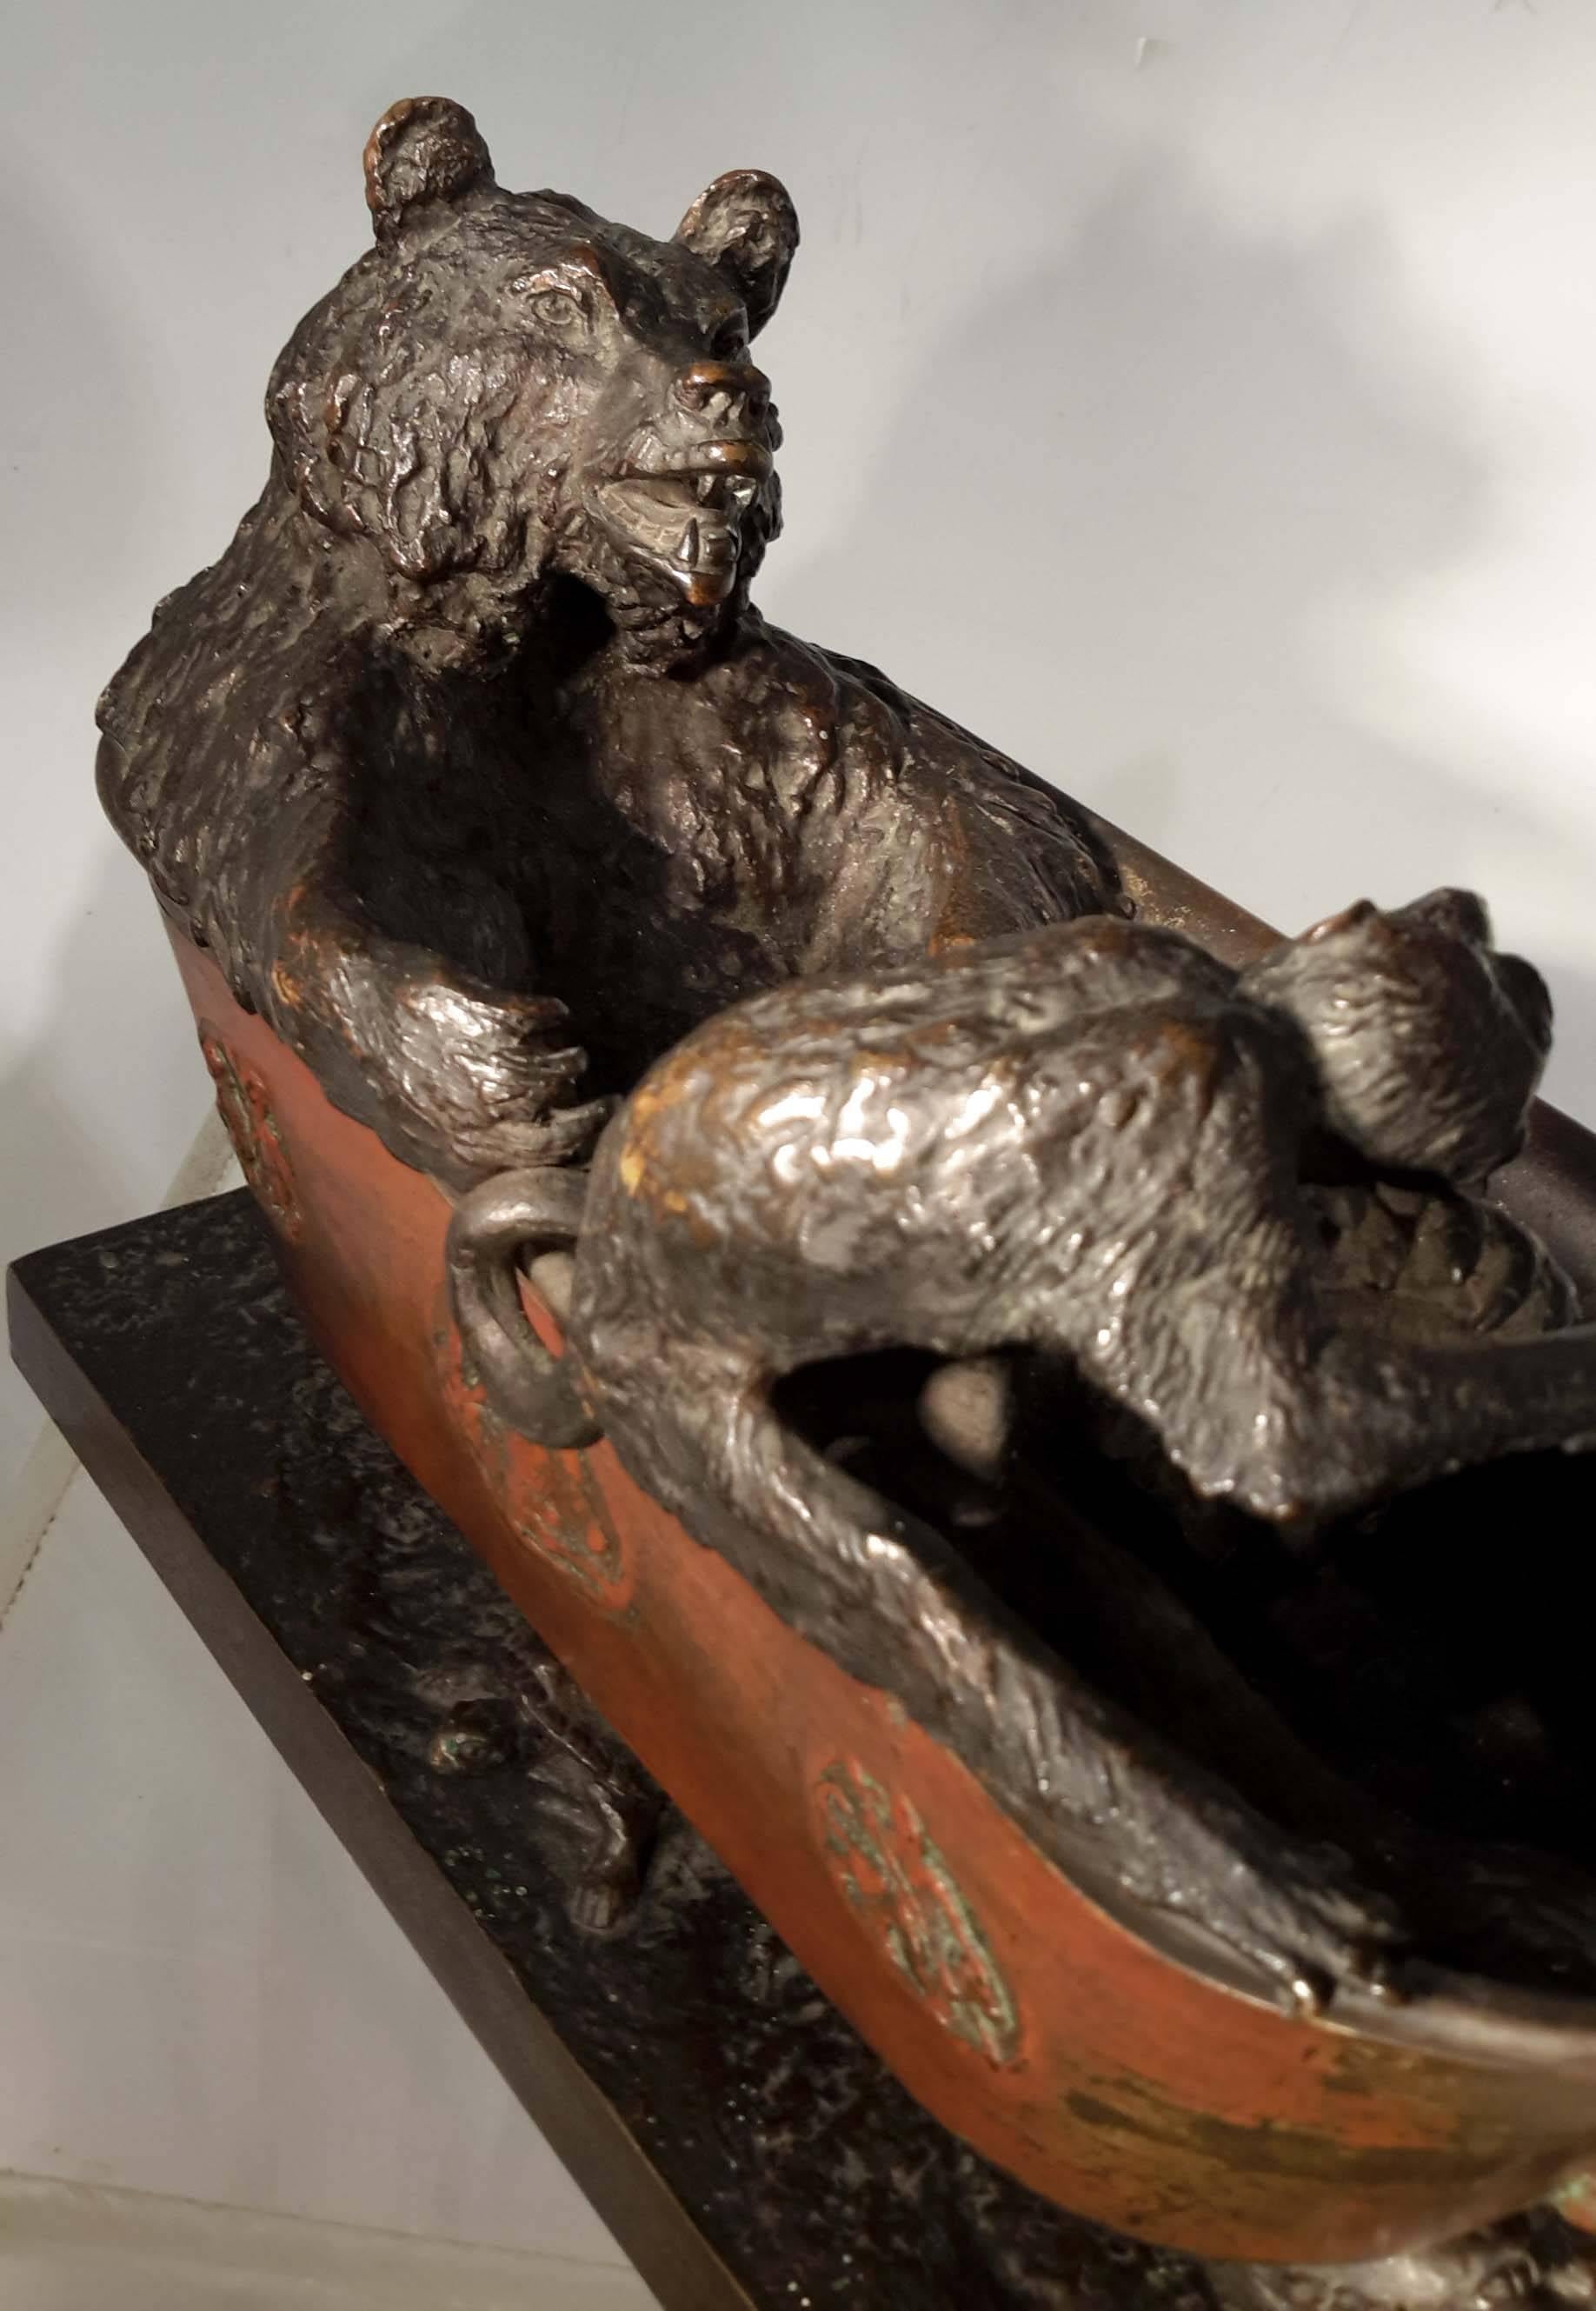 A rare bronze sculpture signed: Fratin. 
circa 1850s. Depicting a erotic subject of a monkey giving pedicure to a bear taking a bath. The bath tub with four turtles as legs and decorated with devil motif. 
Great quality cast bronze, silvered on